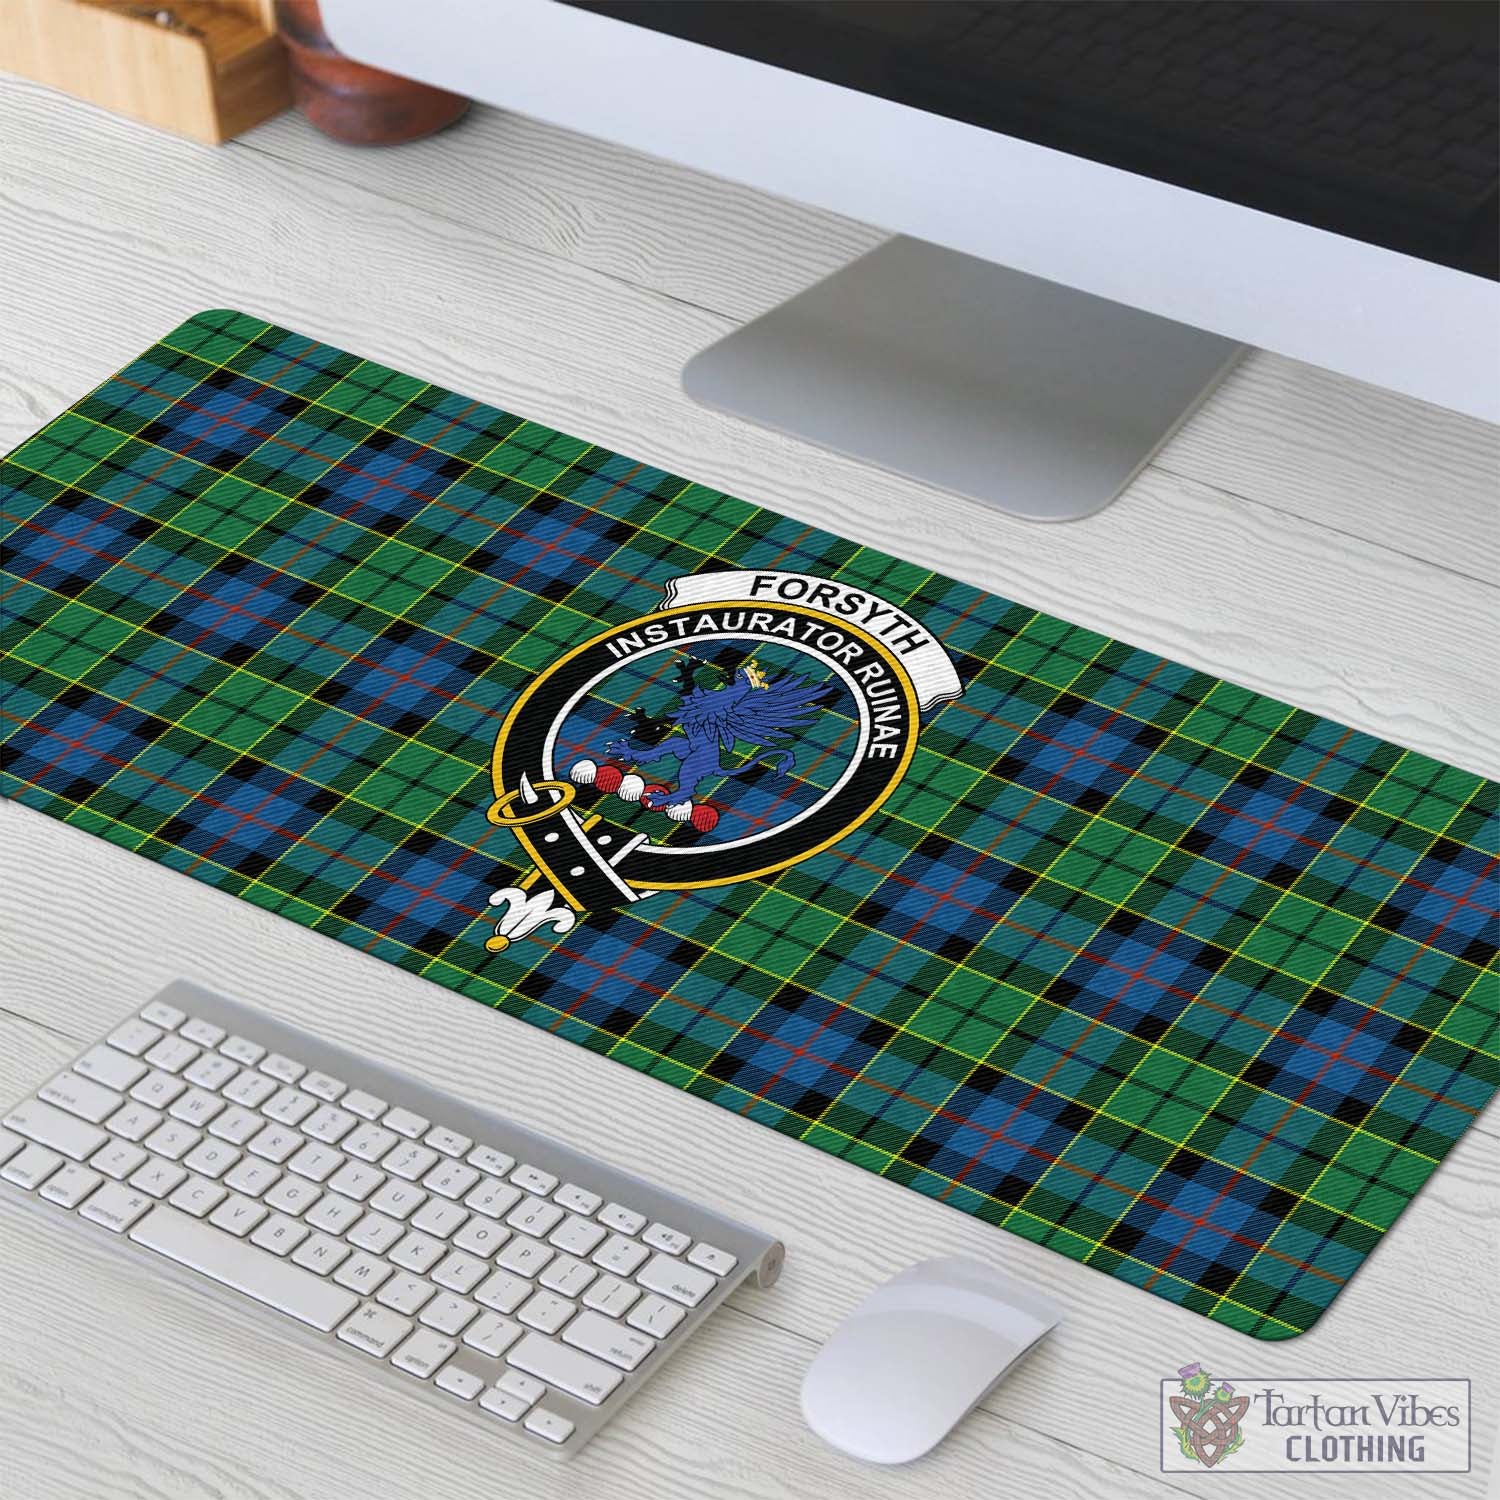 Tartan Vibes Clothing Forsyth Ancient Tartan Mouse Pad with Family Crest